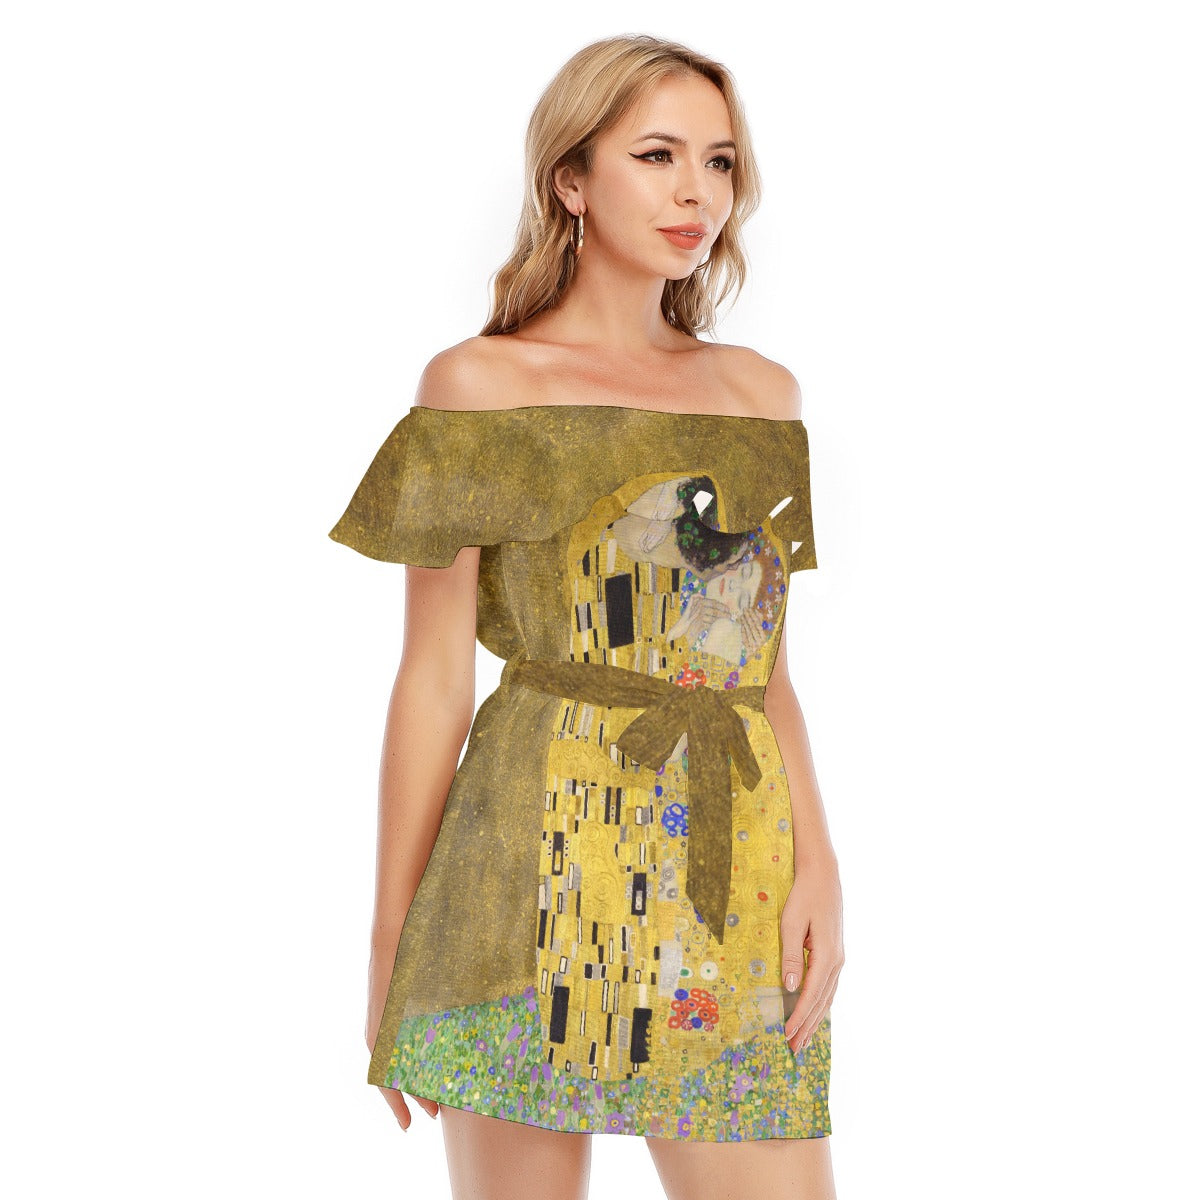 Dreamy fashion statement perfect for art lovers